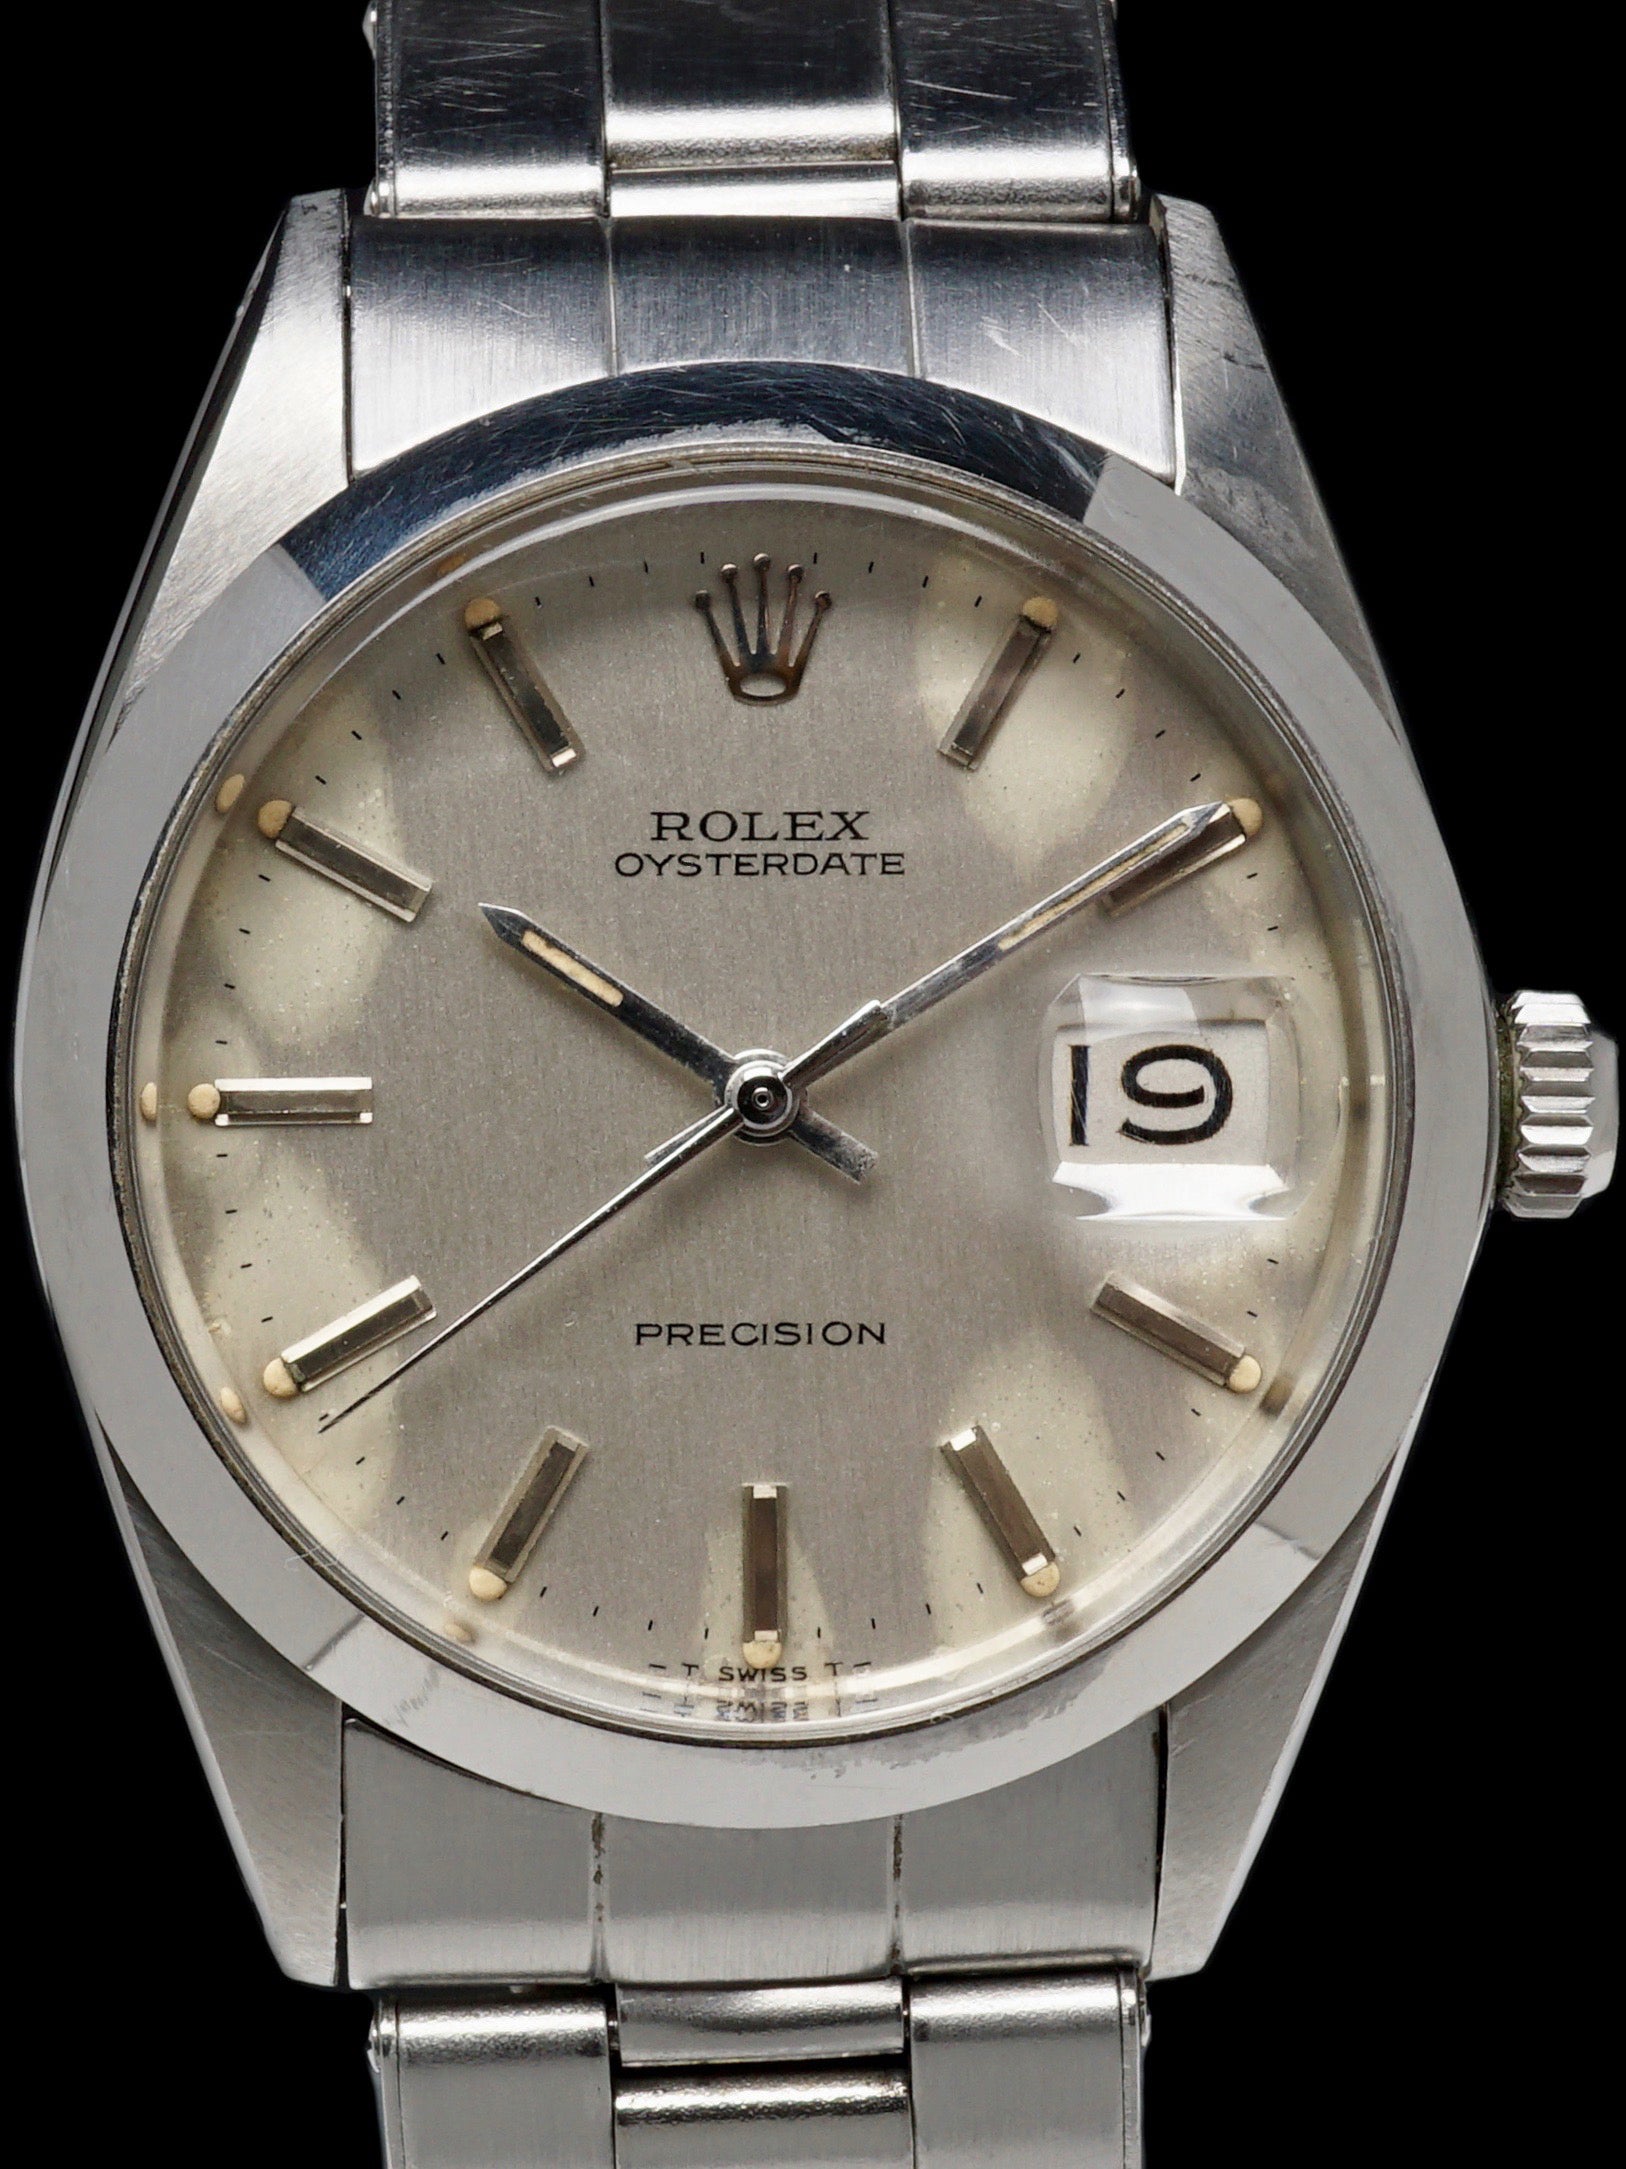 radikal mørkere spøgelse 1969 Rolex Oysterdate Precision (Ref. 6694) With Box and Military Prov